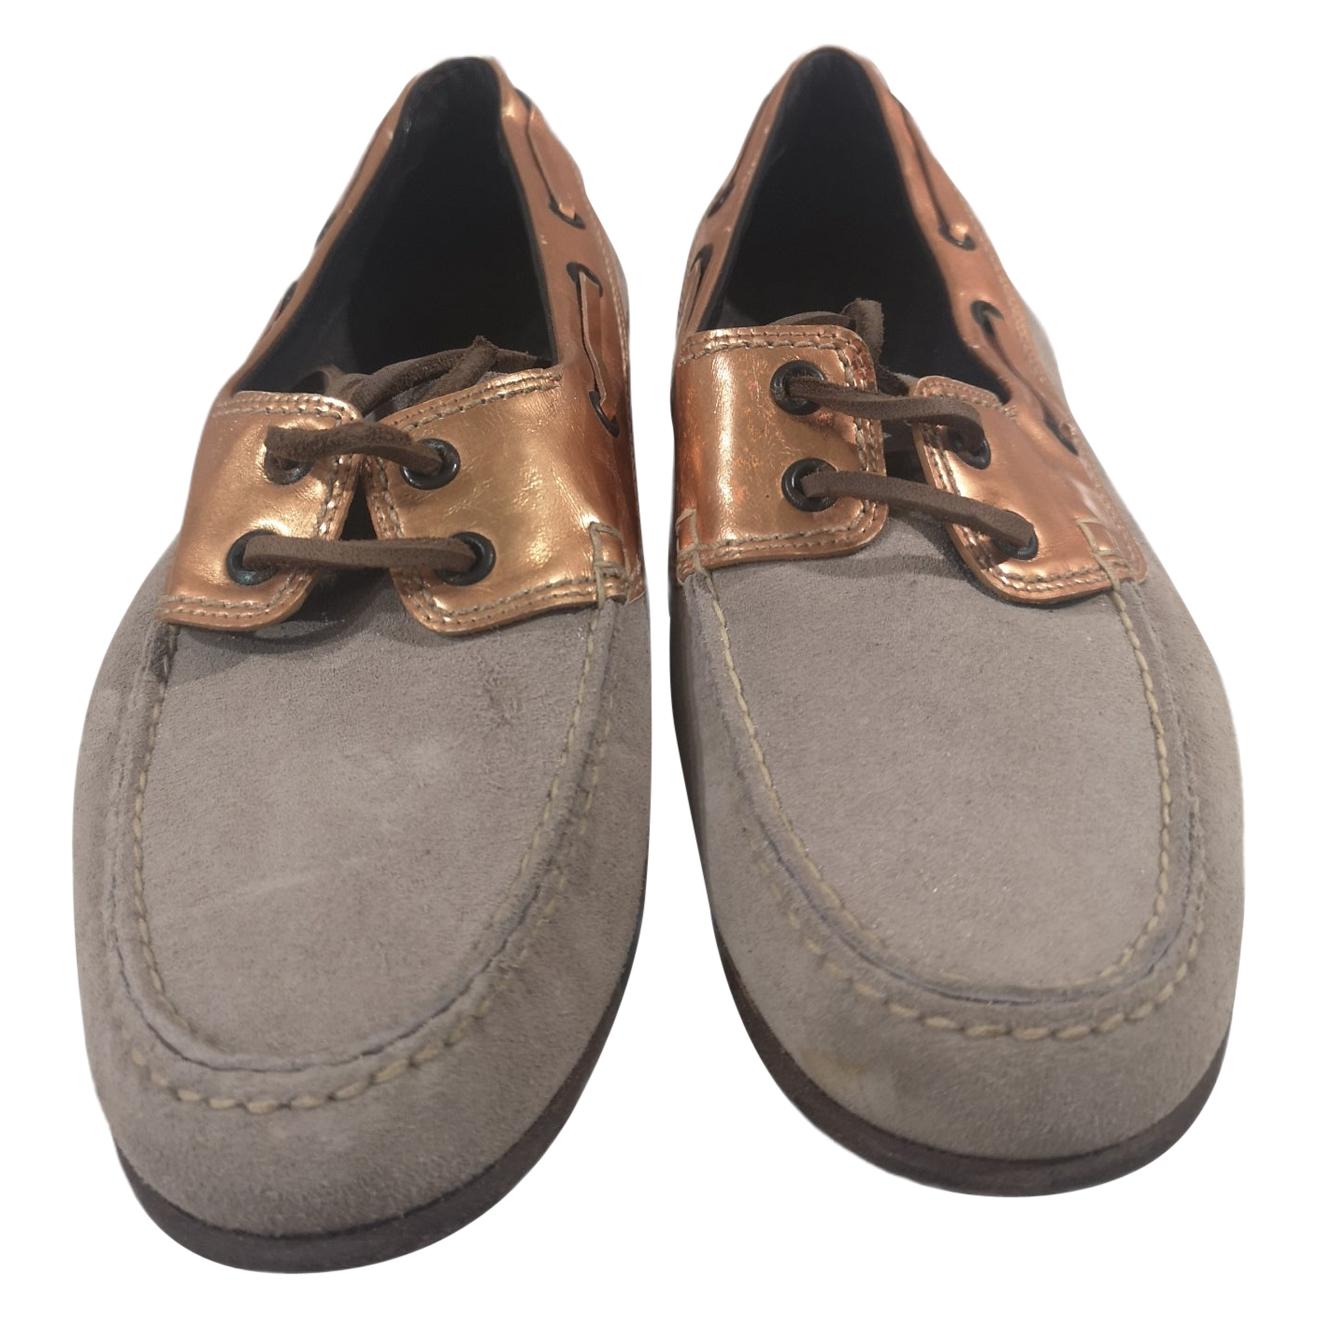 Lanvin grey suede rose gold leather loafers NWOT For Sale